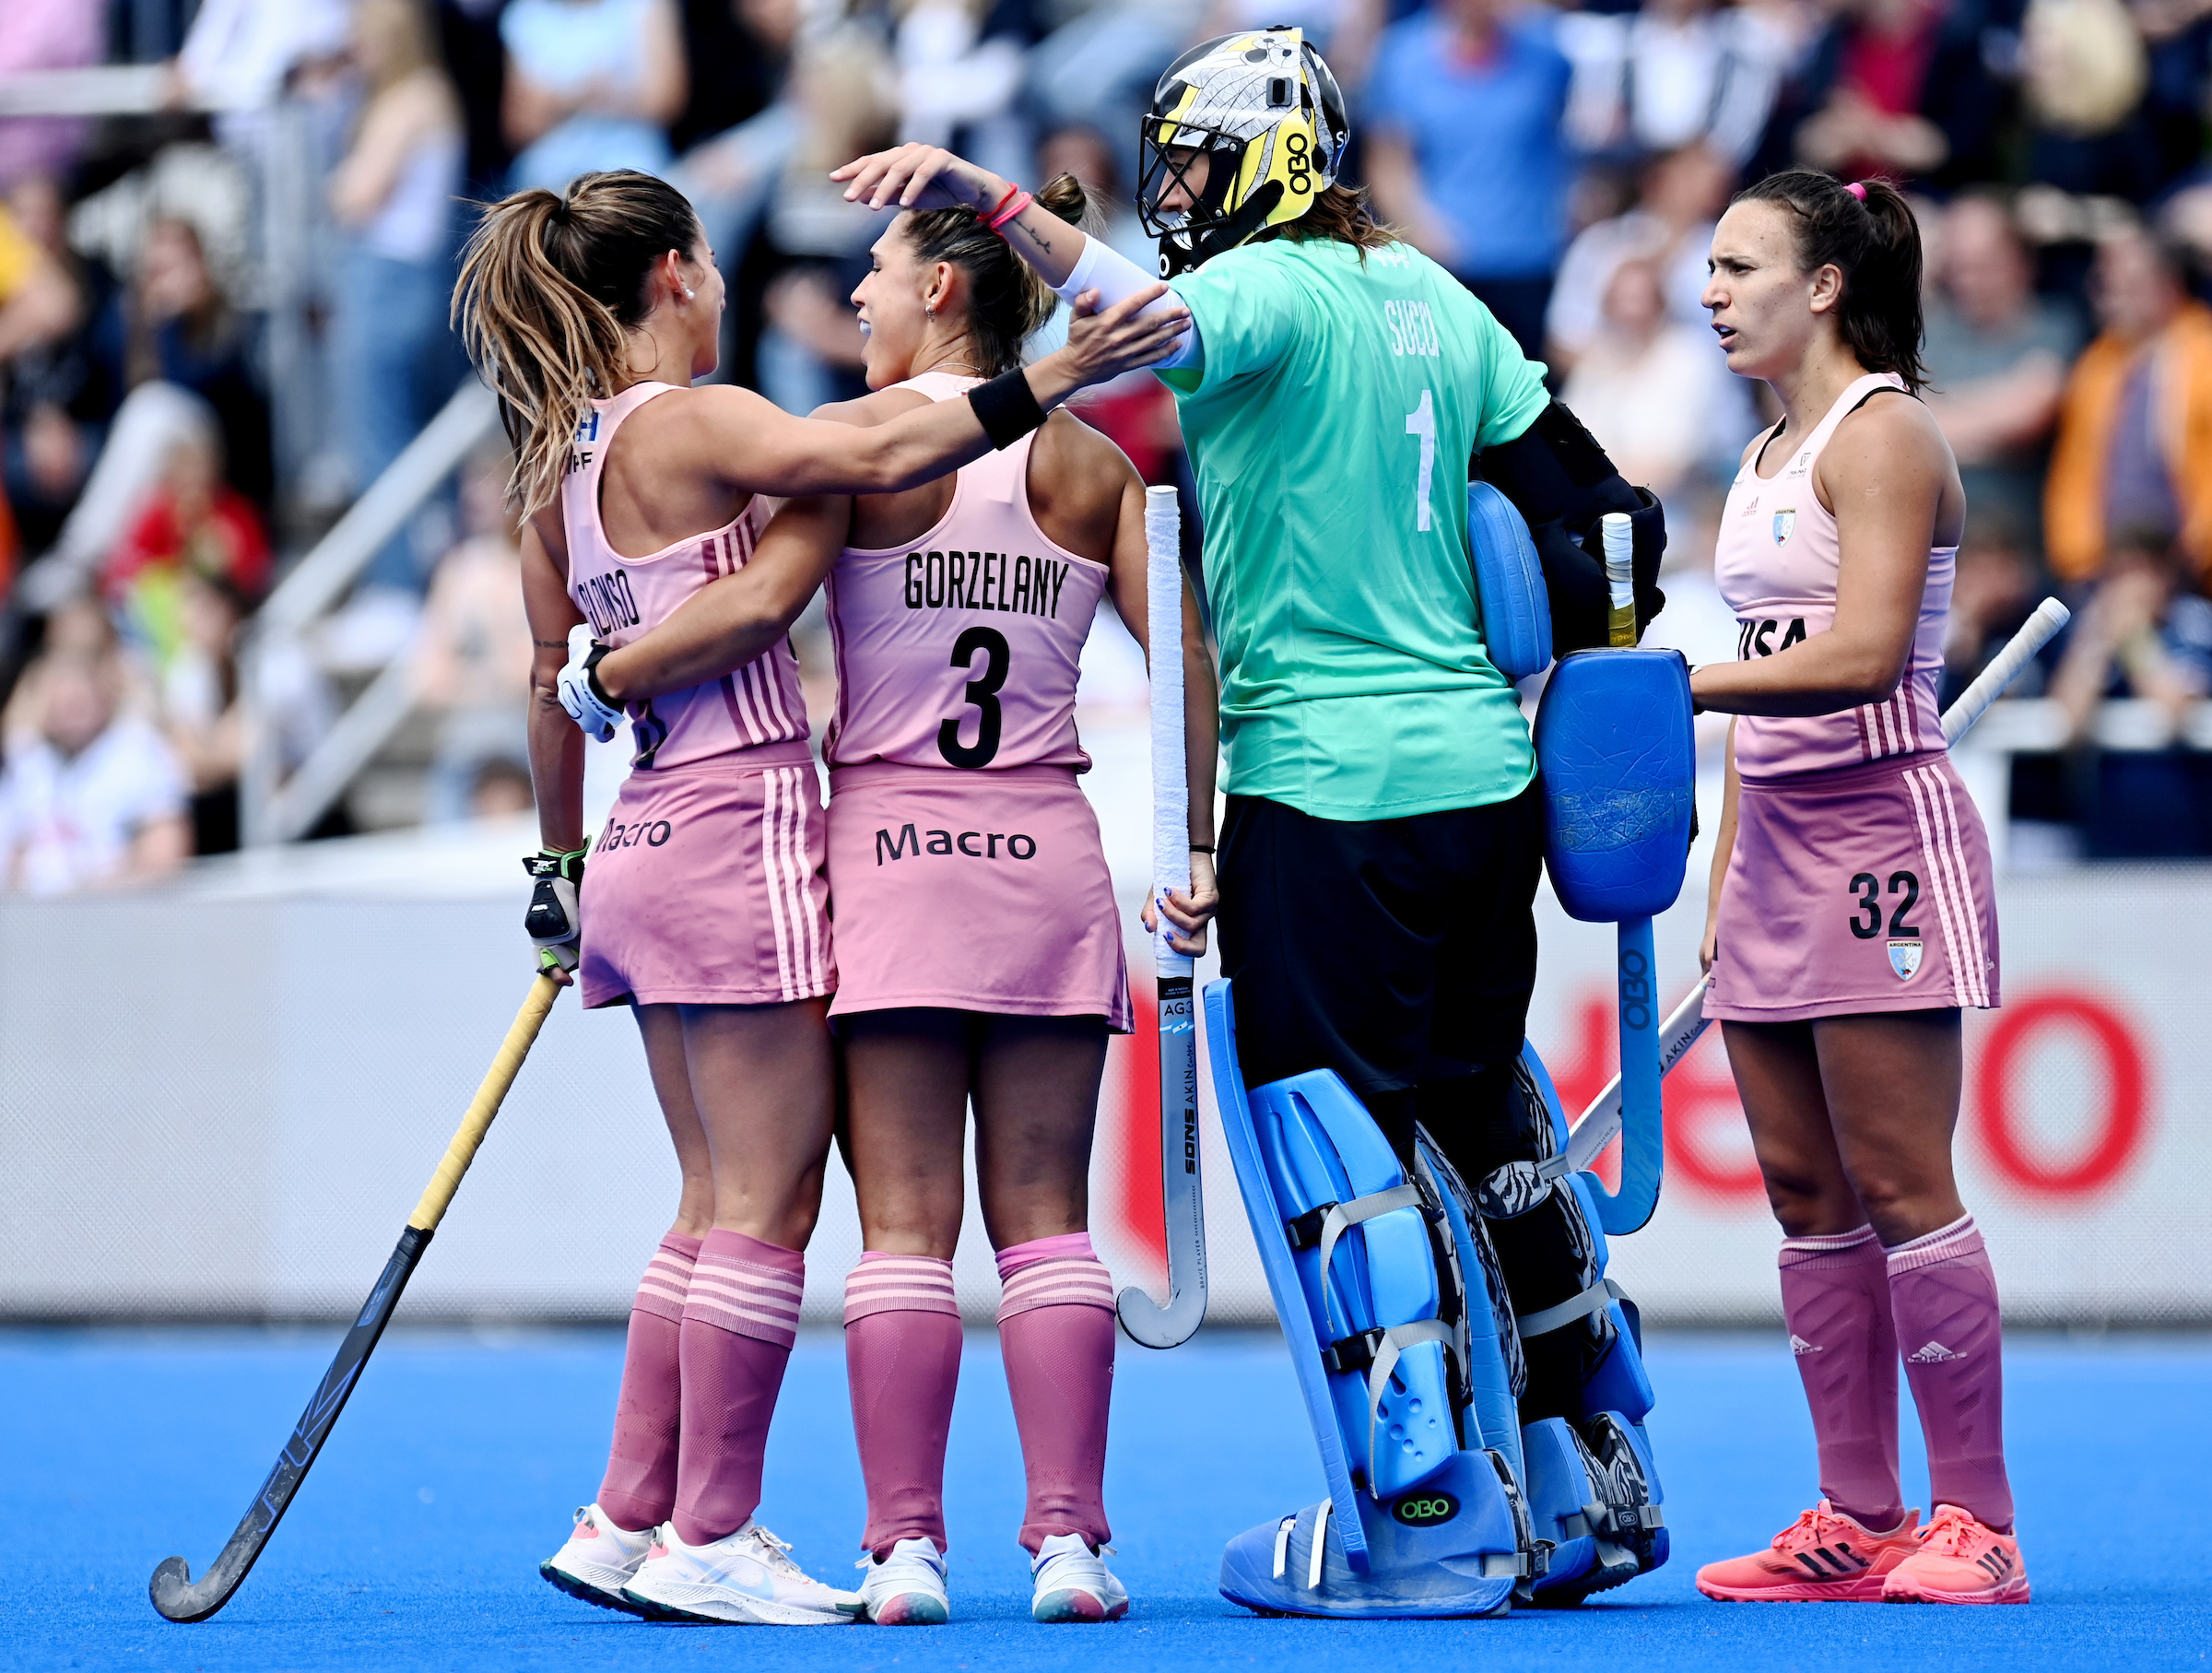 WSP 2205227796 - Pro-League: Leaders Argentina Beat the Danas Again - In the FIH Proleague on May 22, 2022 in Berlin, the Danas met Argentina for the second time in 48 hours. After national coach Valentin Altenburg's team narrowly lost 2-1 to the South Americans the day before, Germany had to admit defeat in the second game, 3-1. Nike Lorenz scored the goal for Germany. Maria Granatto scored twice for Argentina and Jimena Cedres once.